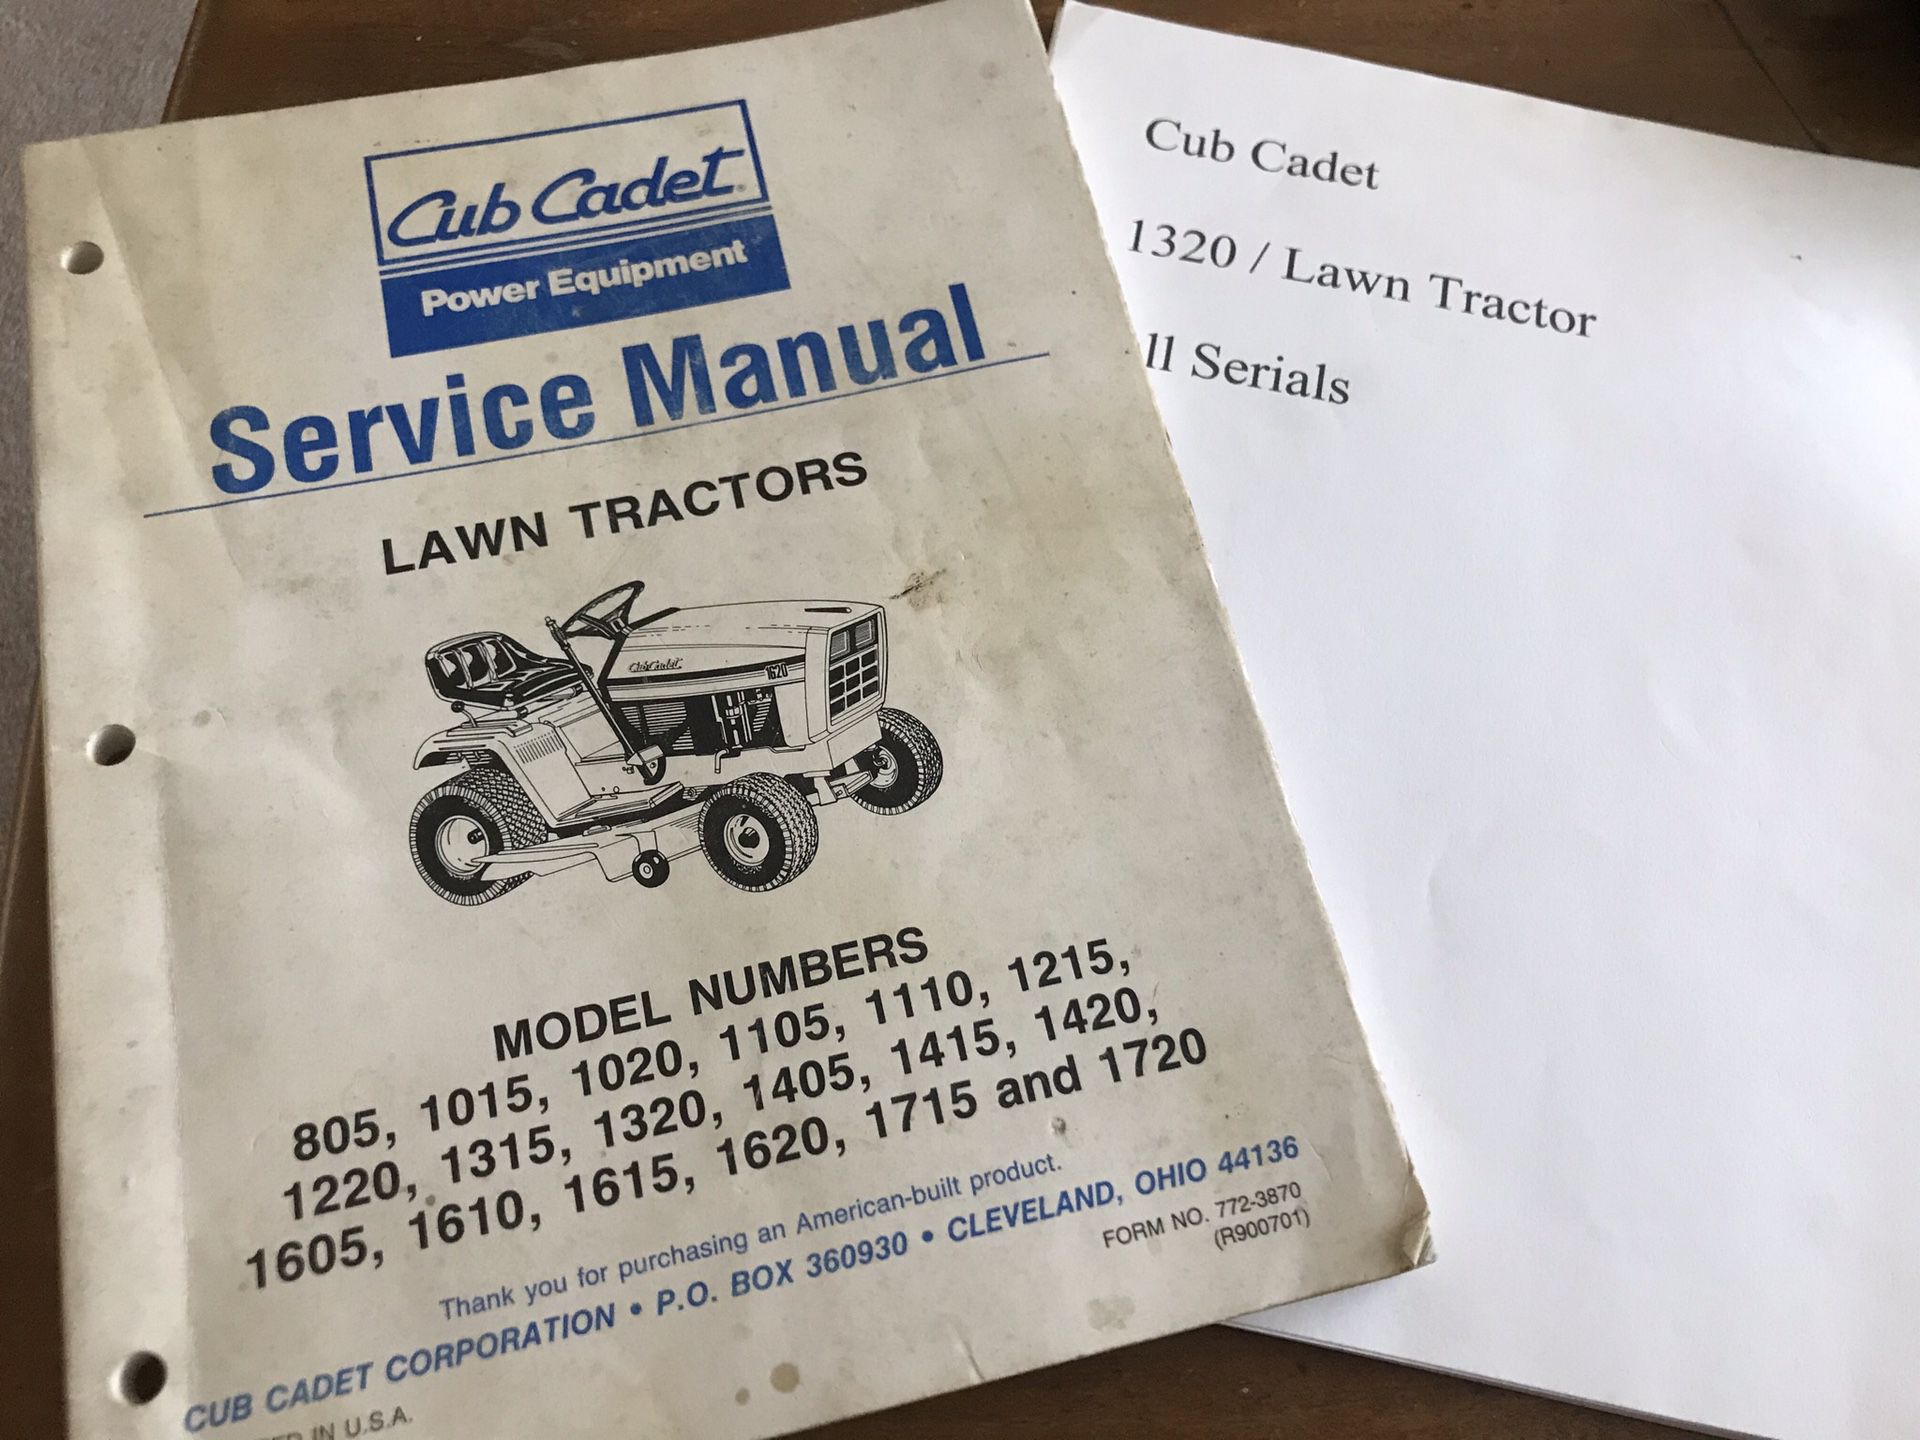 Free Cub Cadet service manual and 1320 part number list.